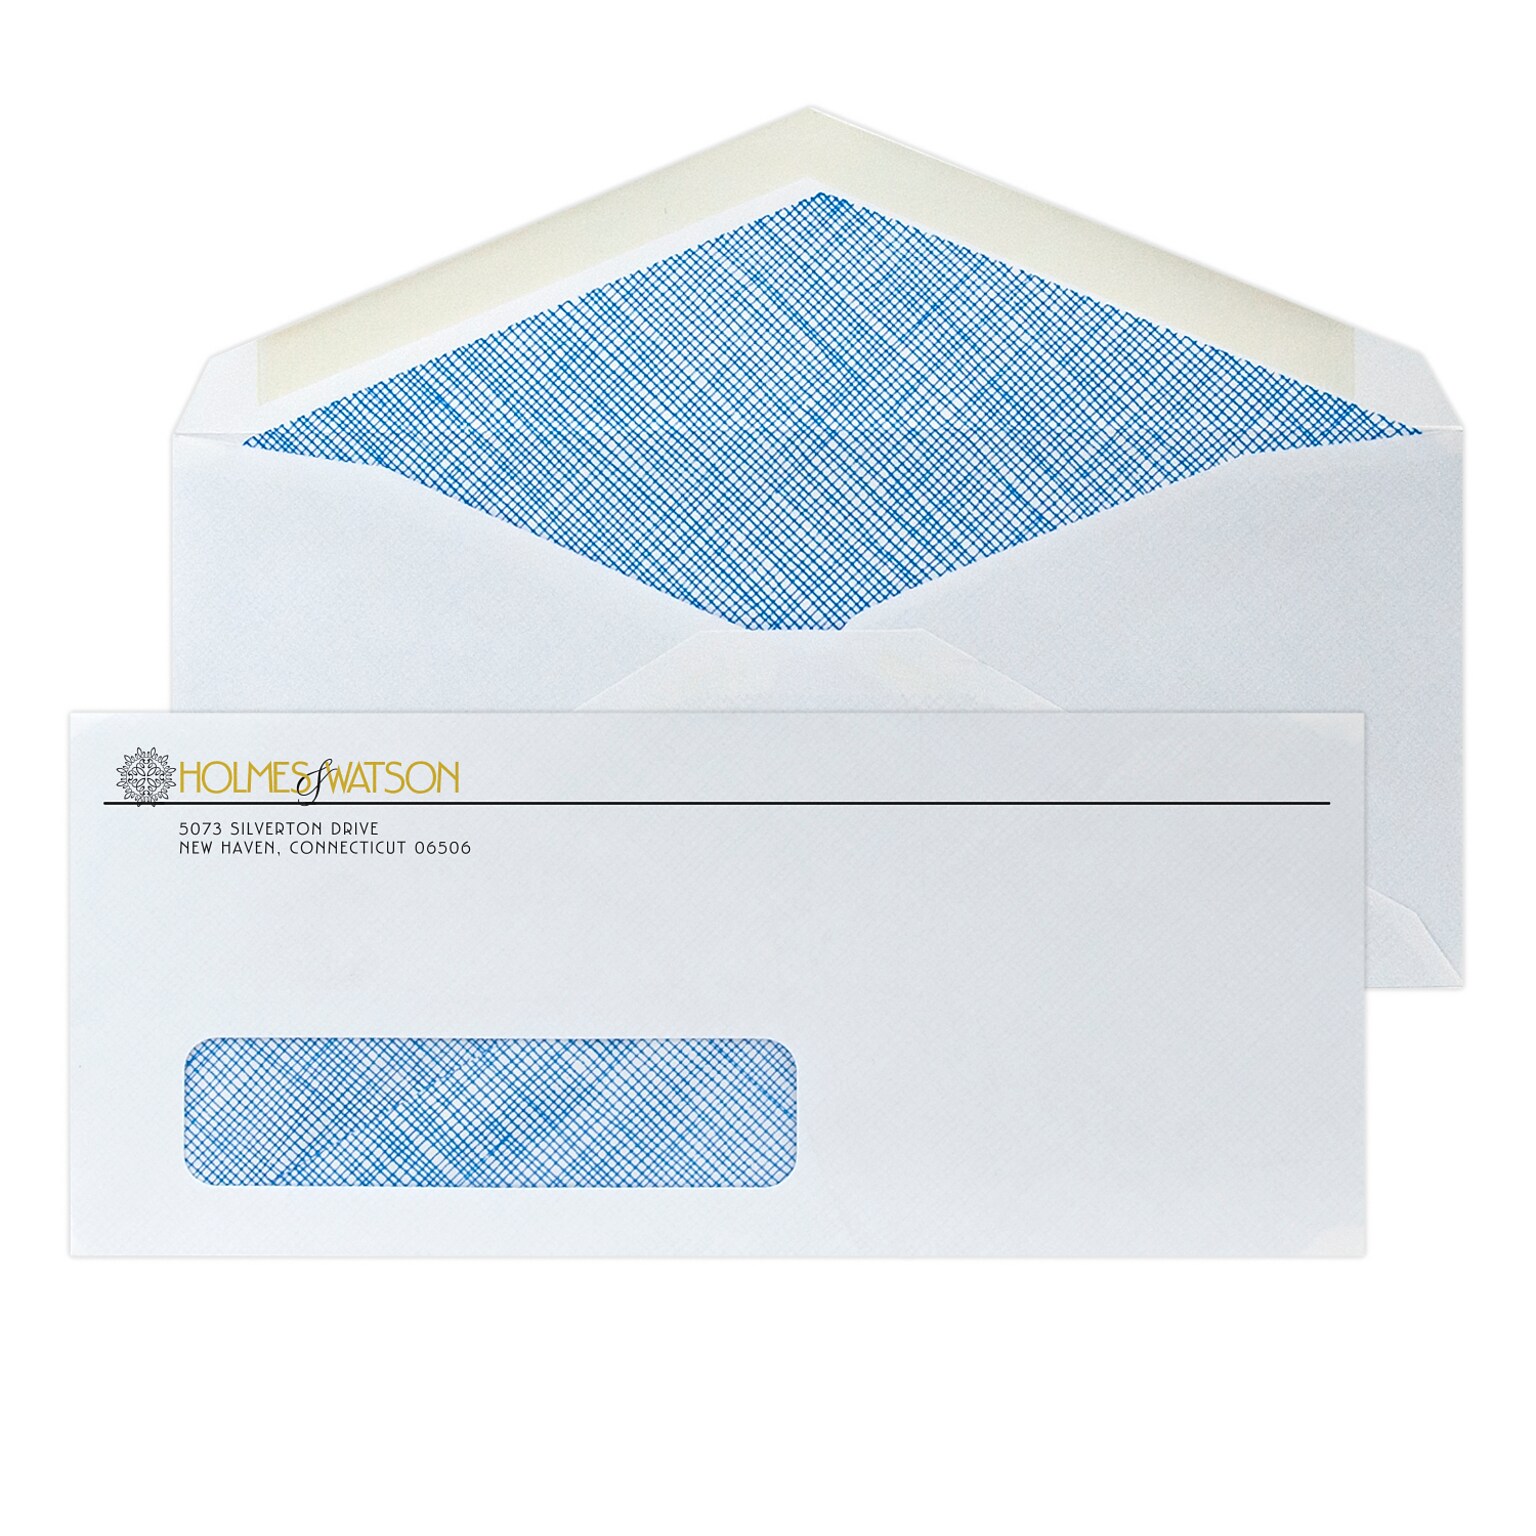 Custom #10 Window Envelopes with Security Tint and V-Flap, 4 1/4x9 1/2, 24# White Wove, 1 Standard and 1 Custom Inks, 250/Pack